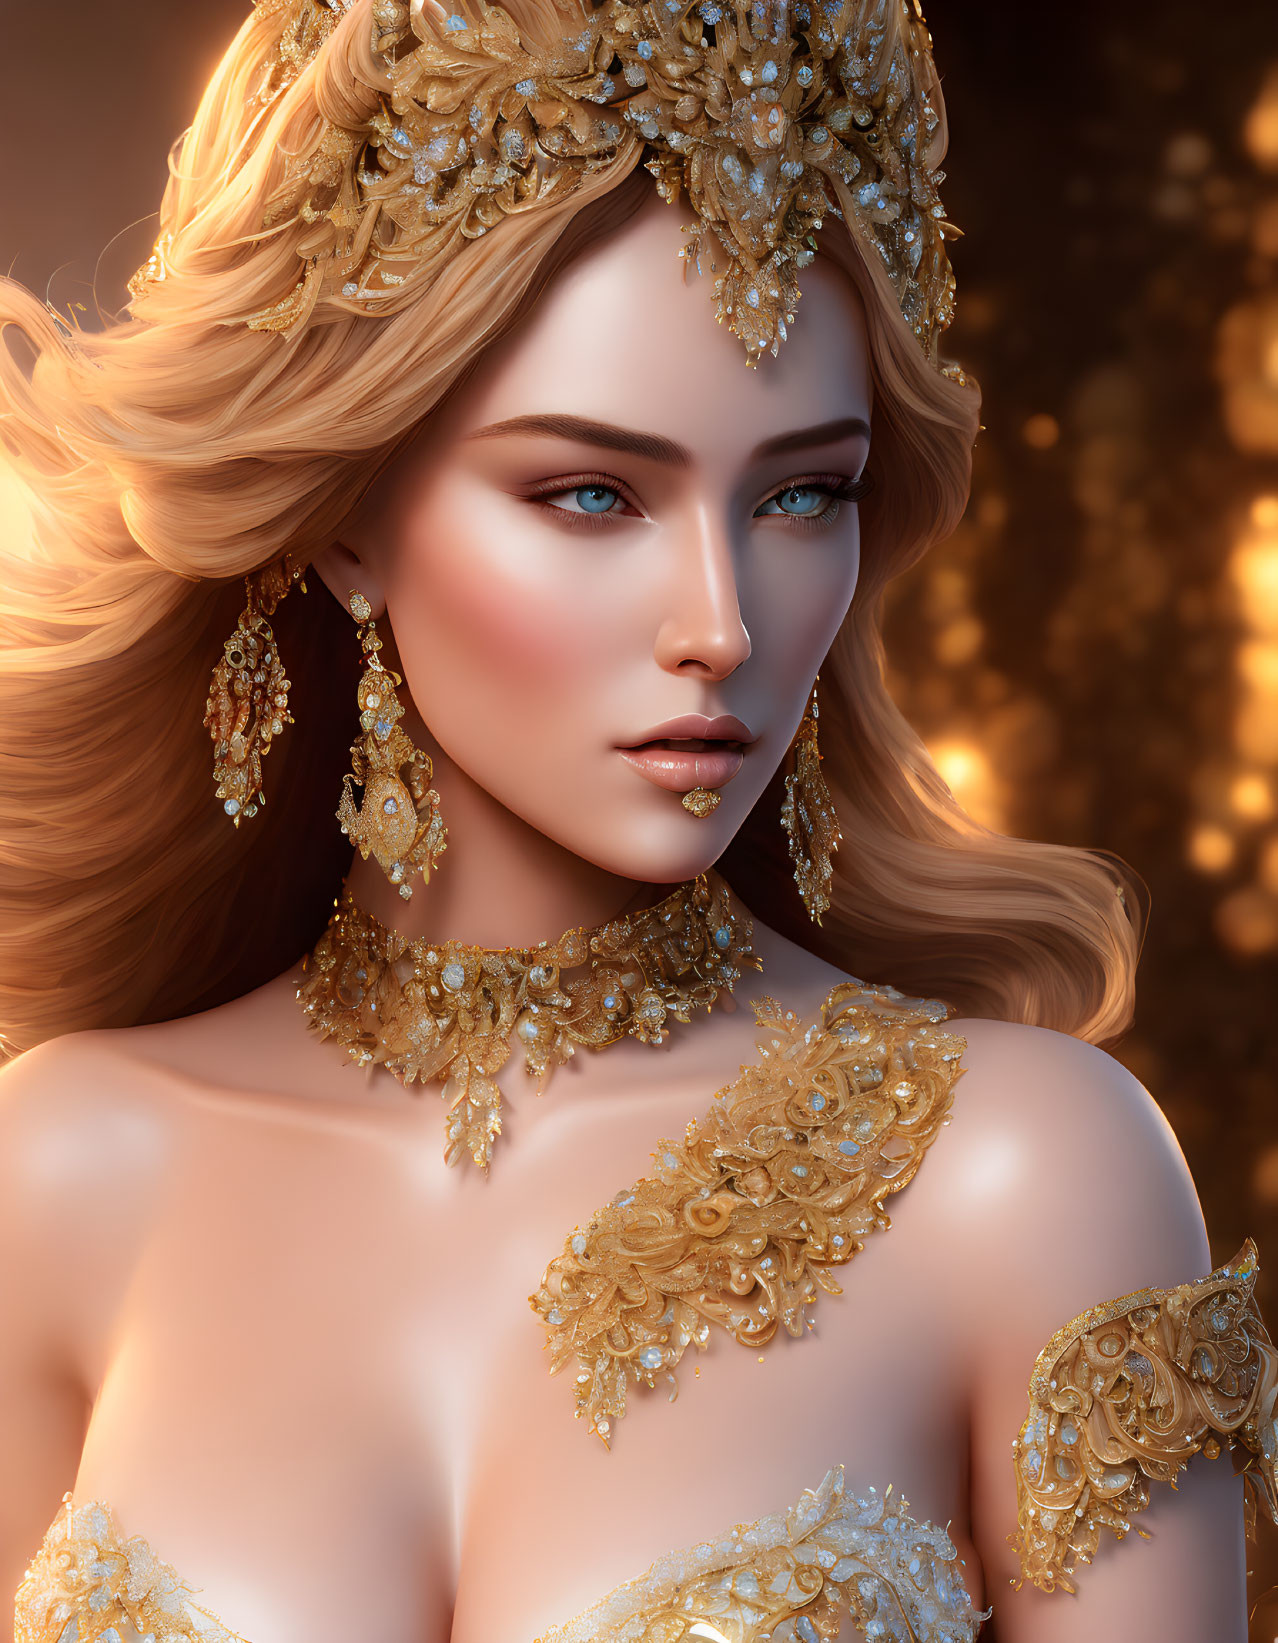 Regal Woman with Golden Headdress and Blue Eyes